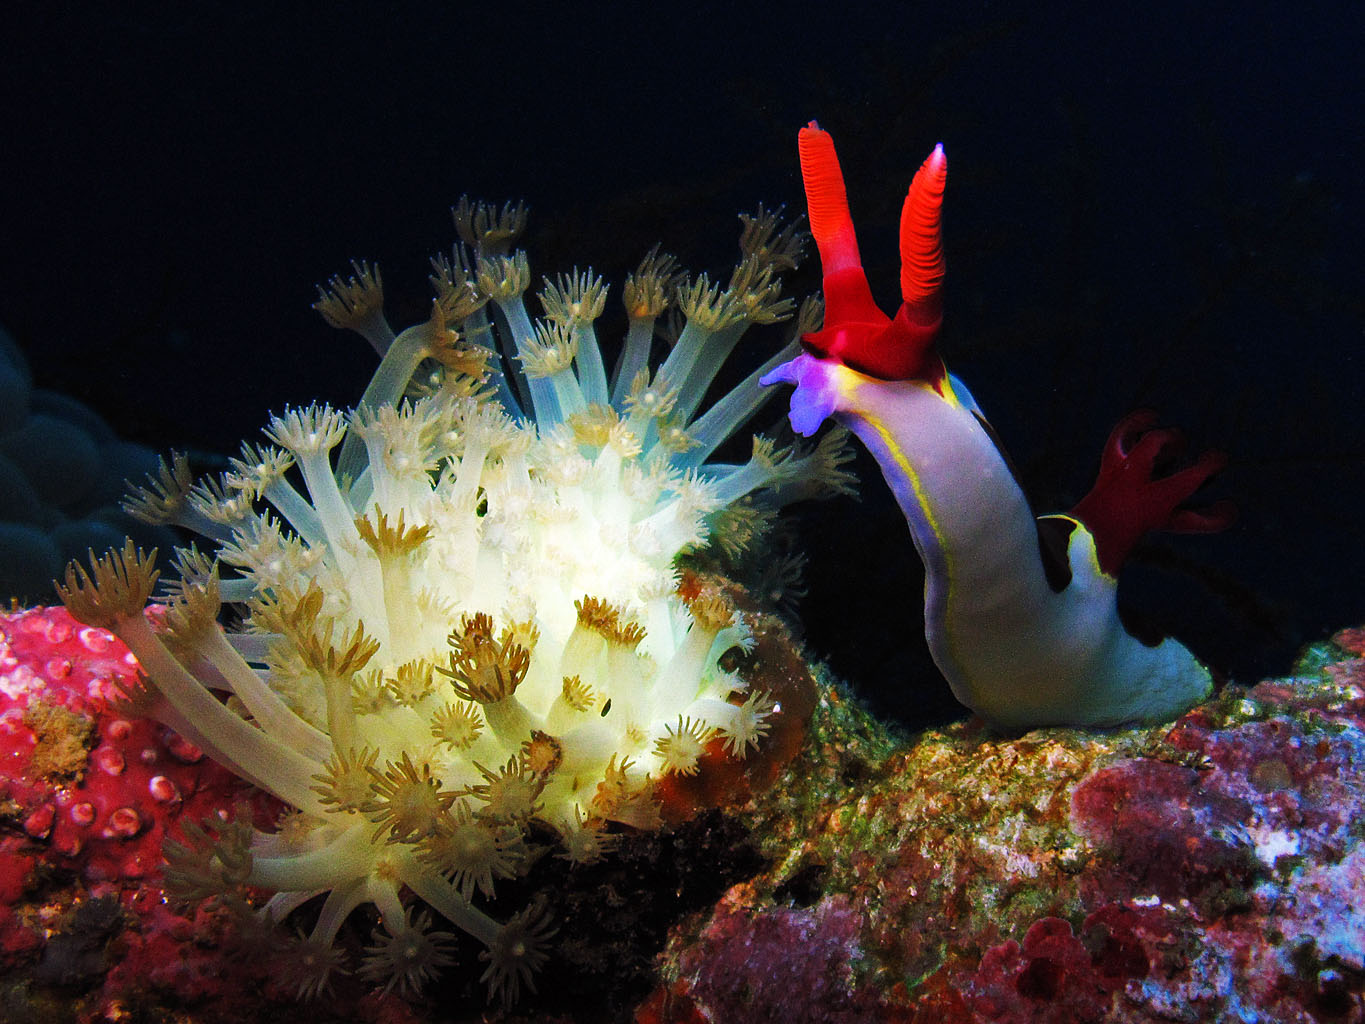 Nudibranch- The Philippines